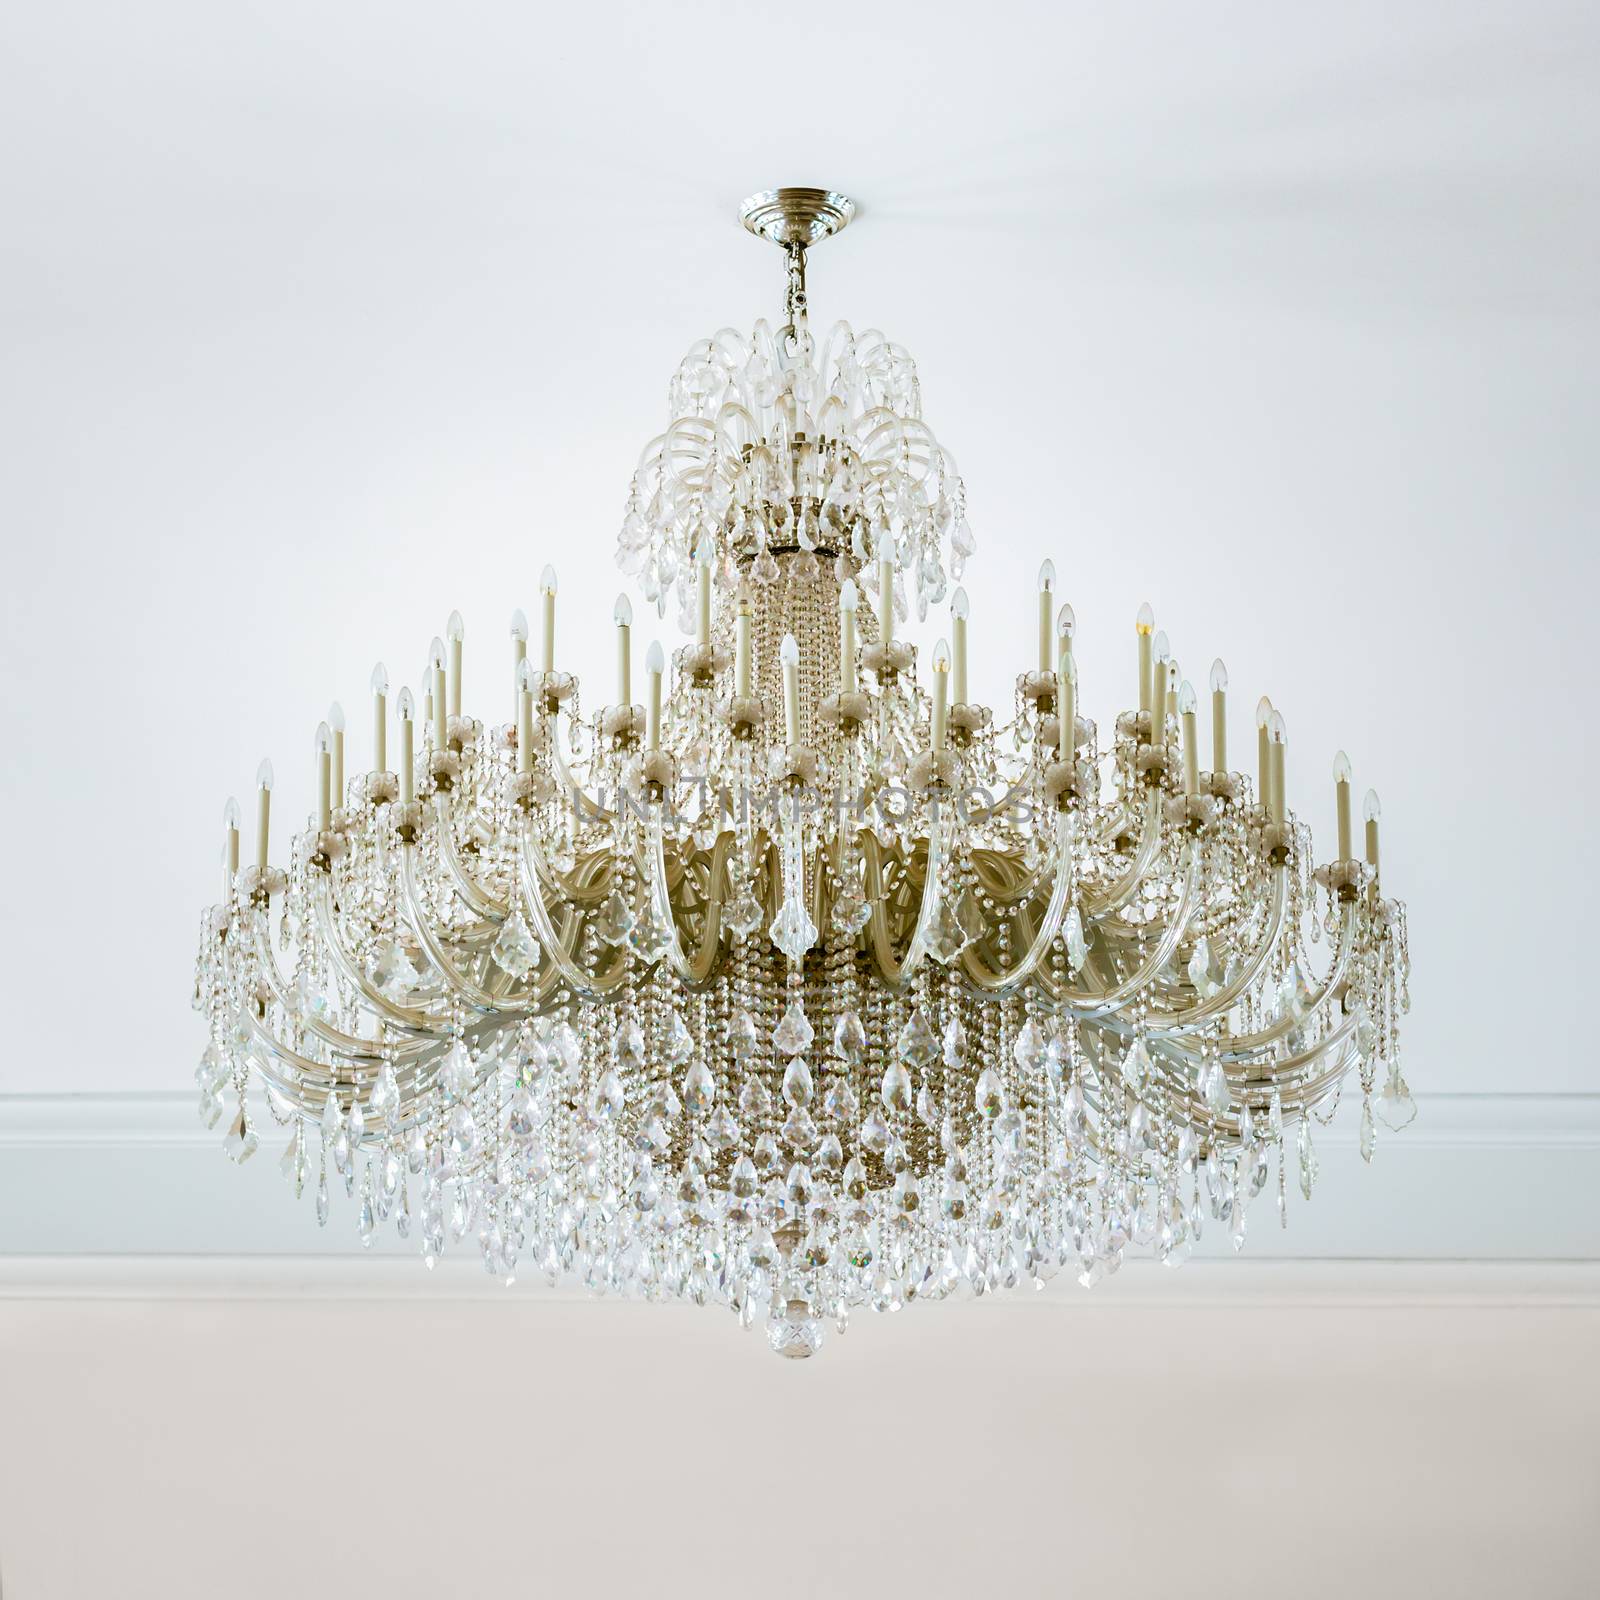 Crystal chandelier  by AEyZRiO